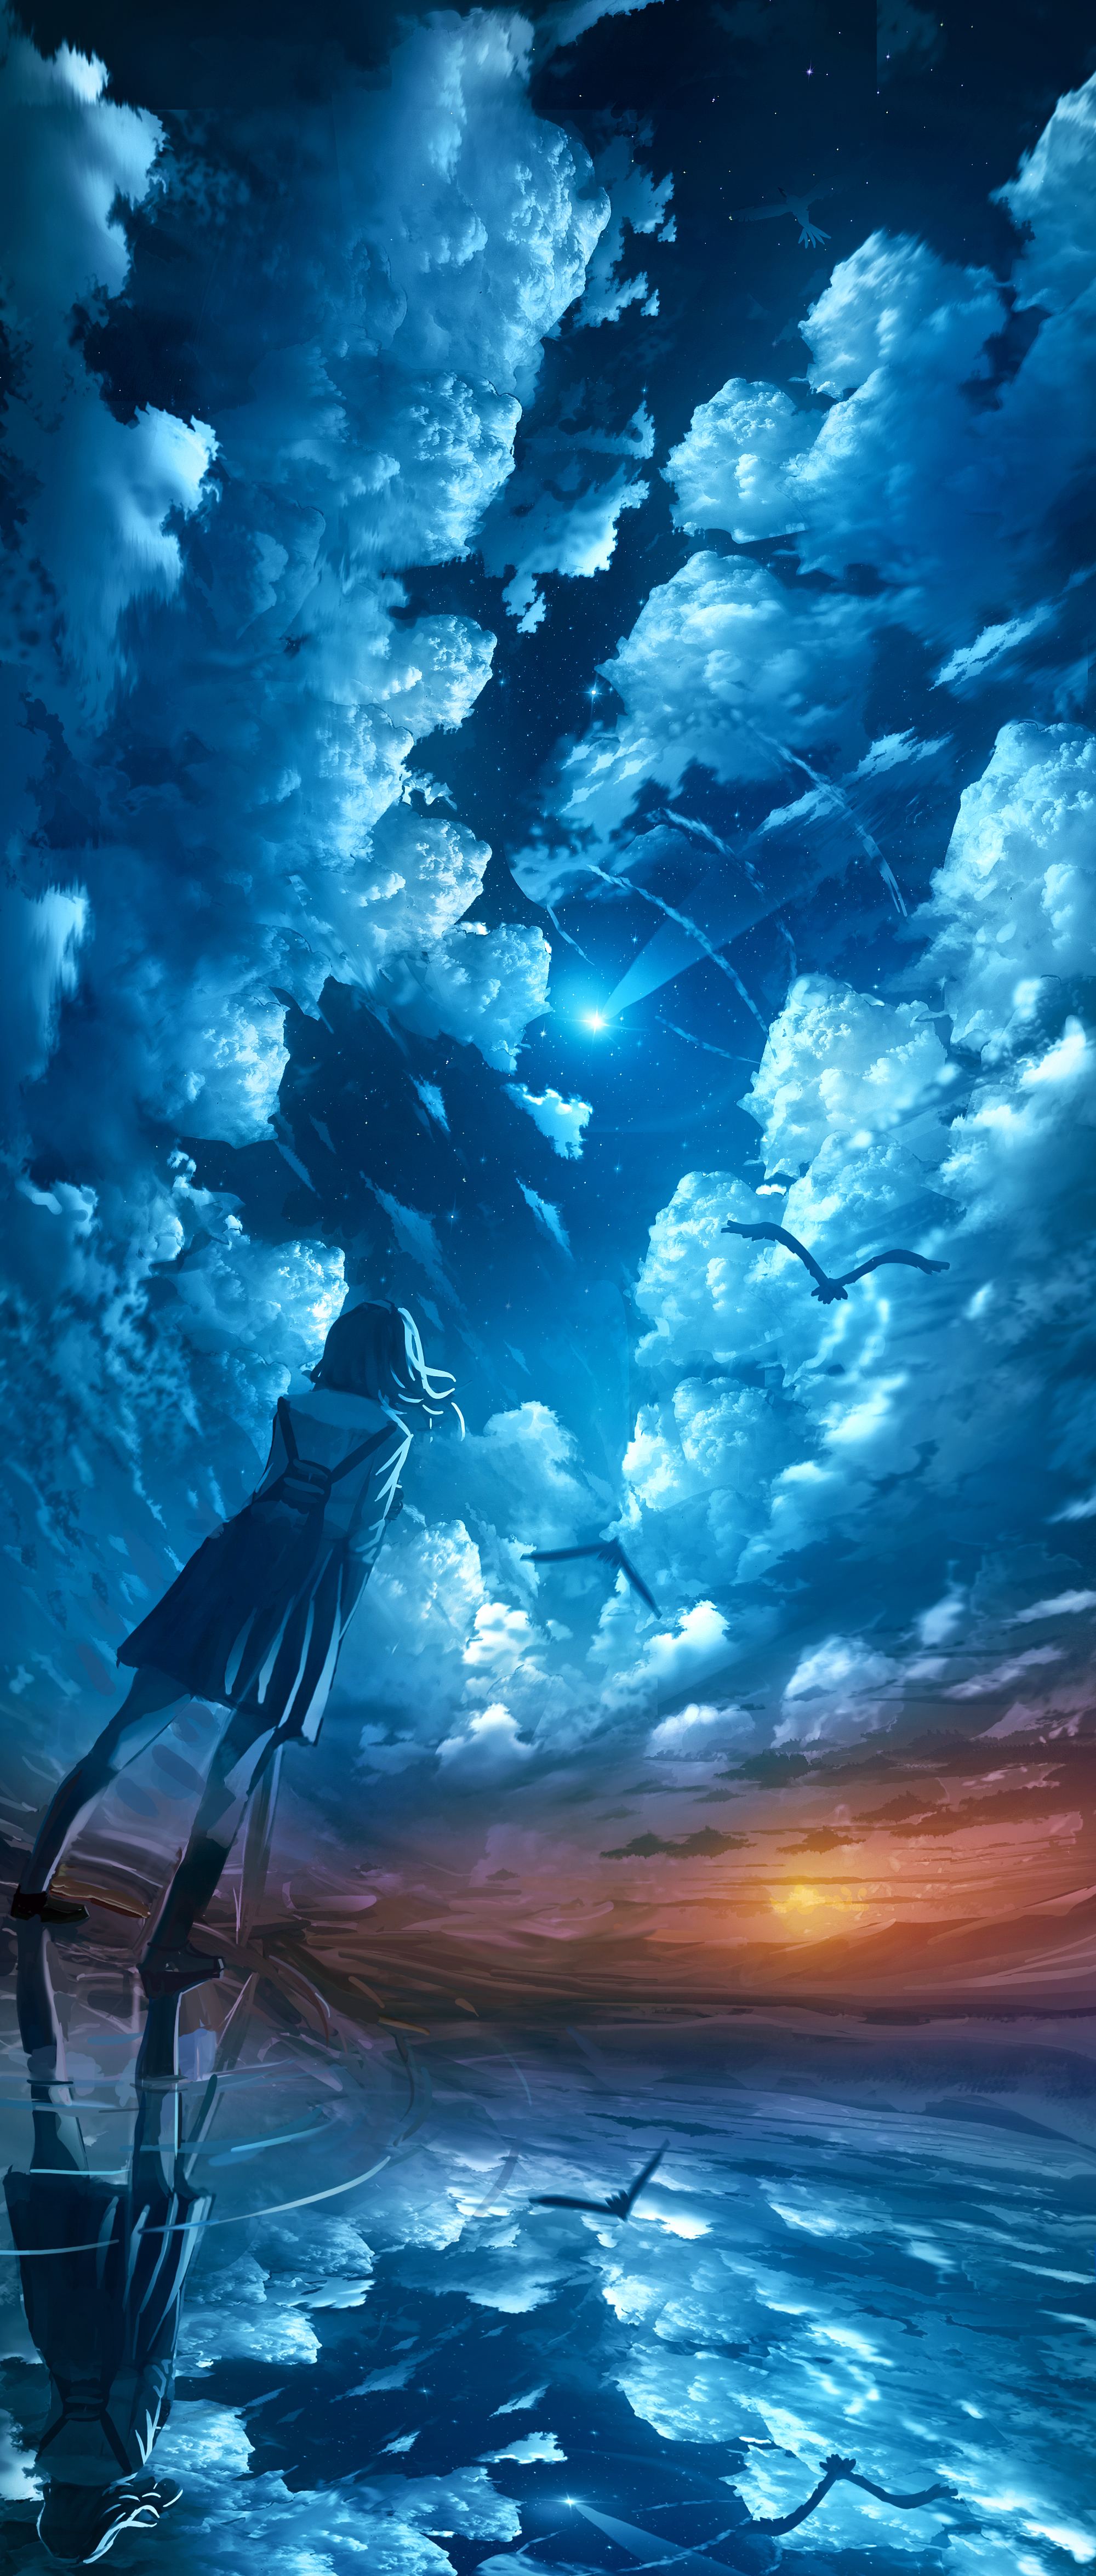 Anime 2000x4700 original characters birds sky clouds water portrait display reflection low-angle shooting stars starred sky starry night cumulus rear view Kenzo 093 ripples standing mountains skirt knee-highs night evening women outdoors sunset